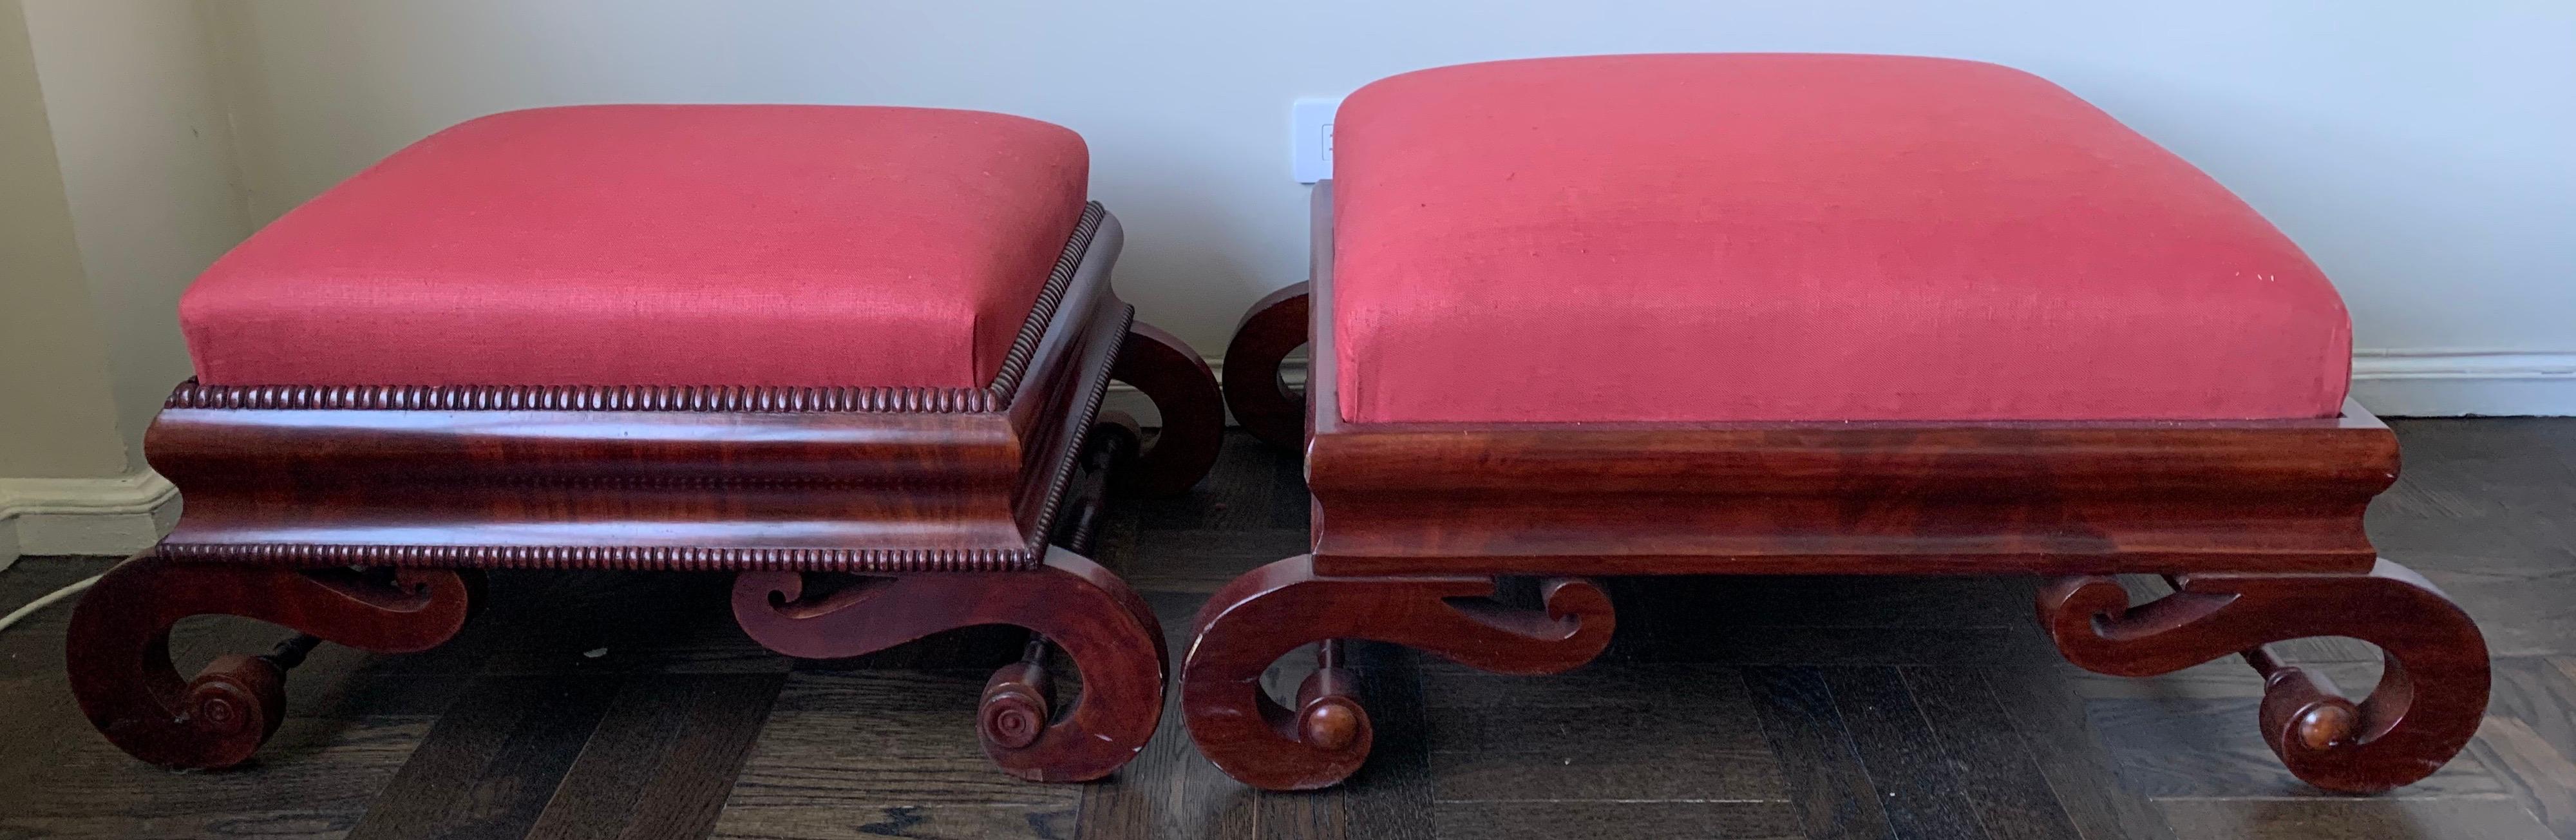 Set of 2 large carved mahogany Curule base footstools, Boston, 1830s. Recently reupholstered in red Scalamandre linen fabric. Larger stool is 32.5” wide x 24” deep x 16” tall.
Smaller stool is 29” wide x 19” deep x 14.5” tall.